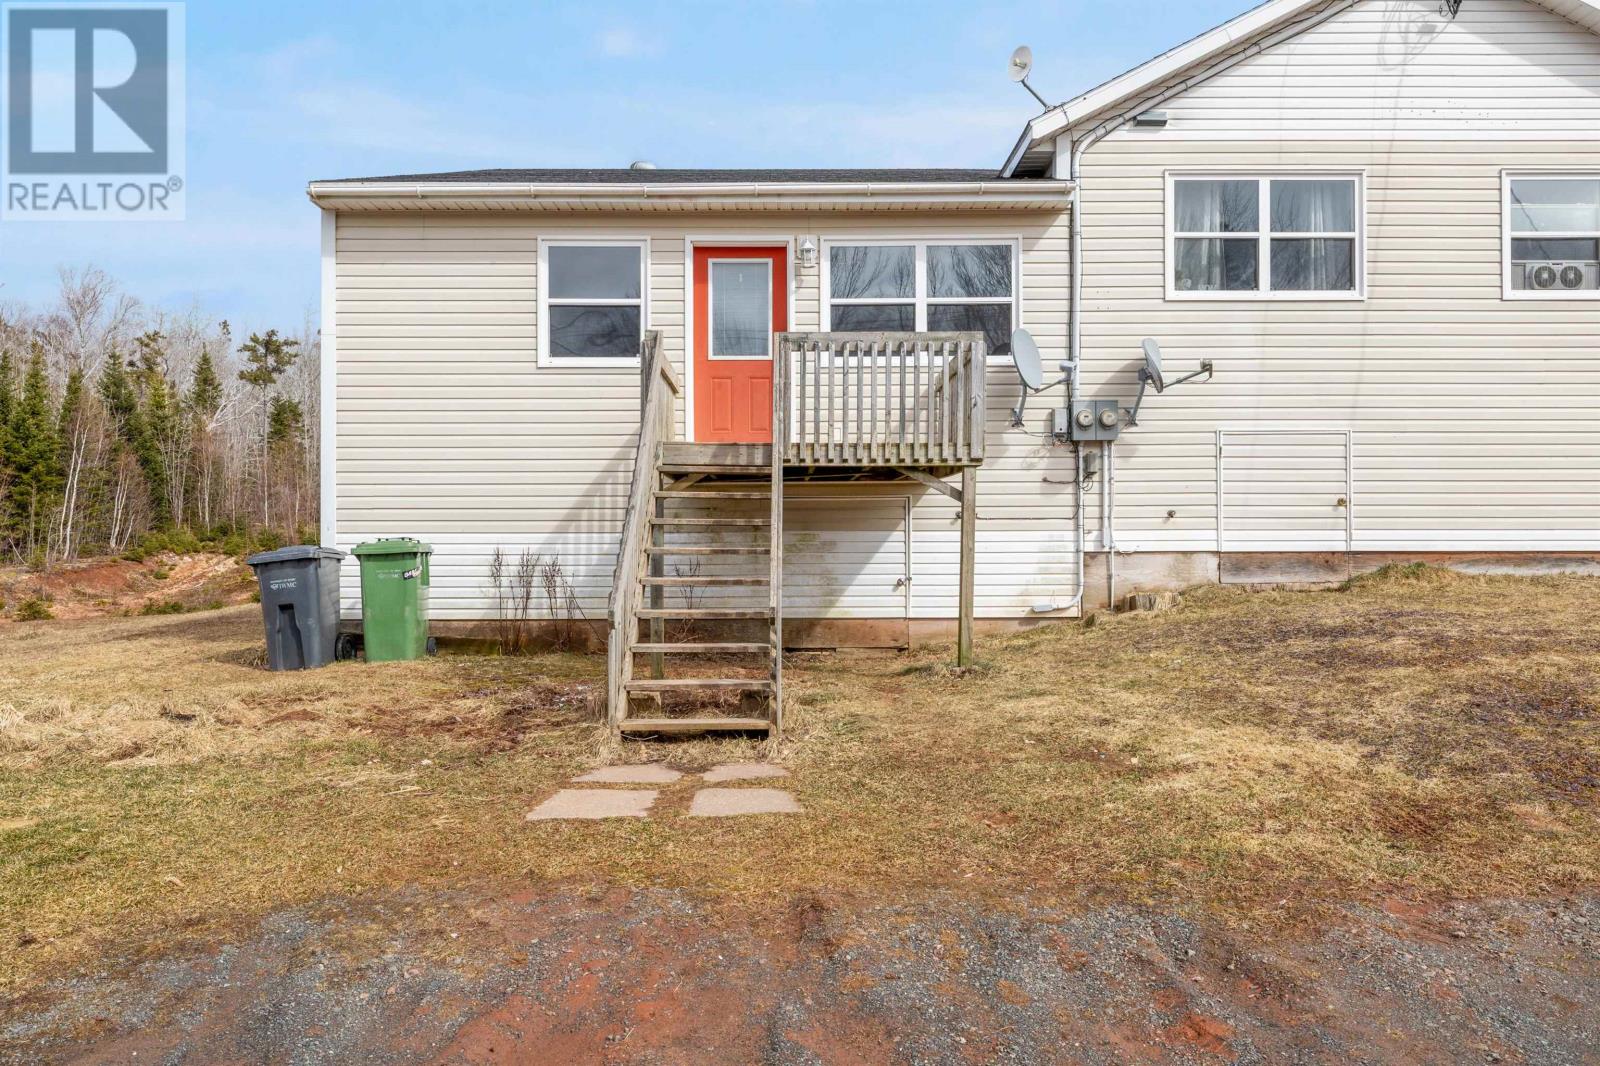 5825/5827 Campbell Road, Victoria Cross, Montague, Prince Edward Island  C0A 1R0 - Photo 3 - 202405403